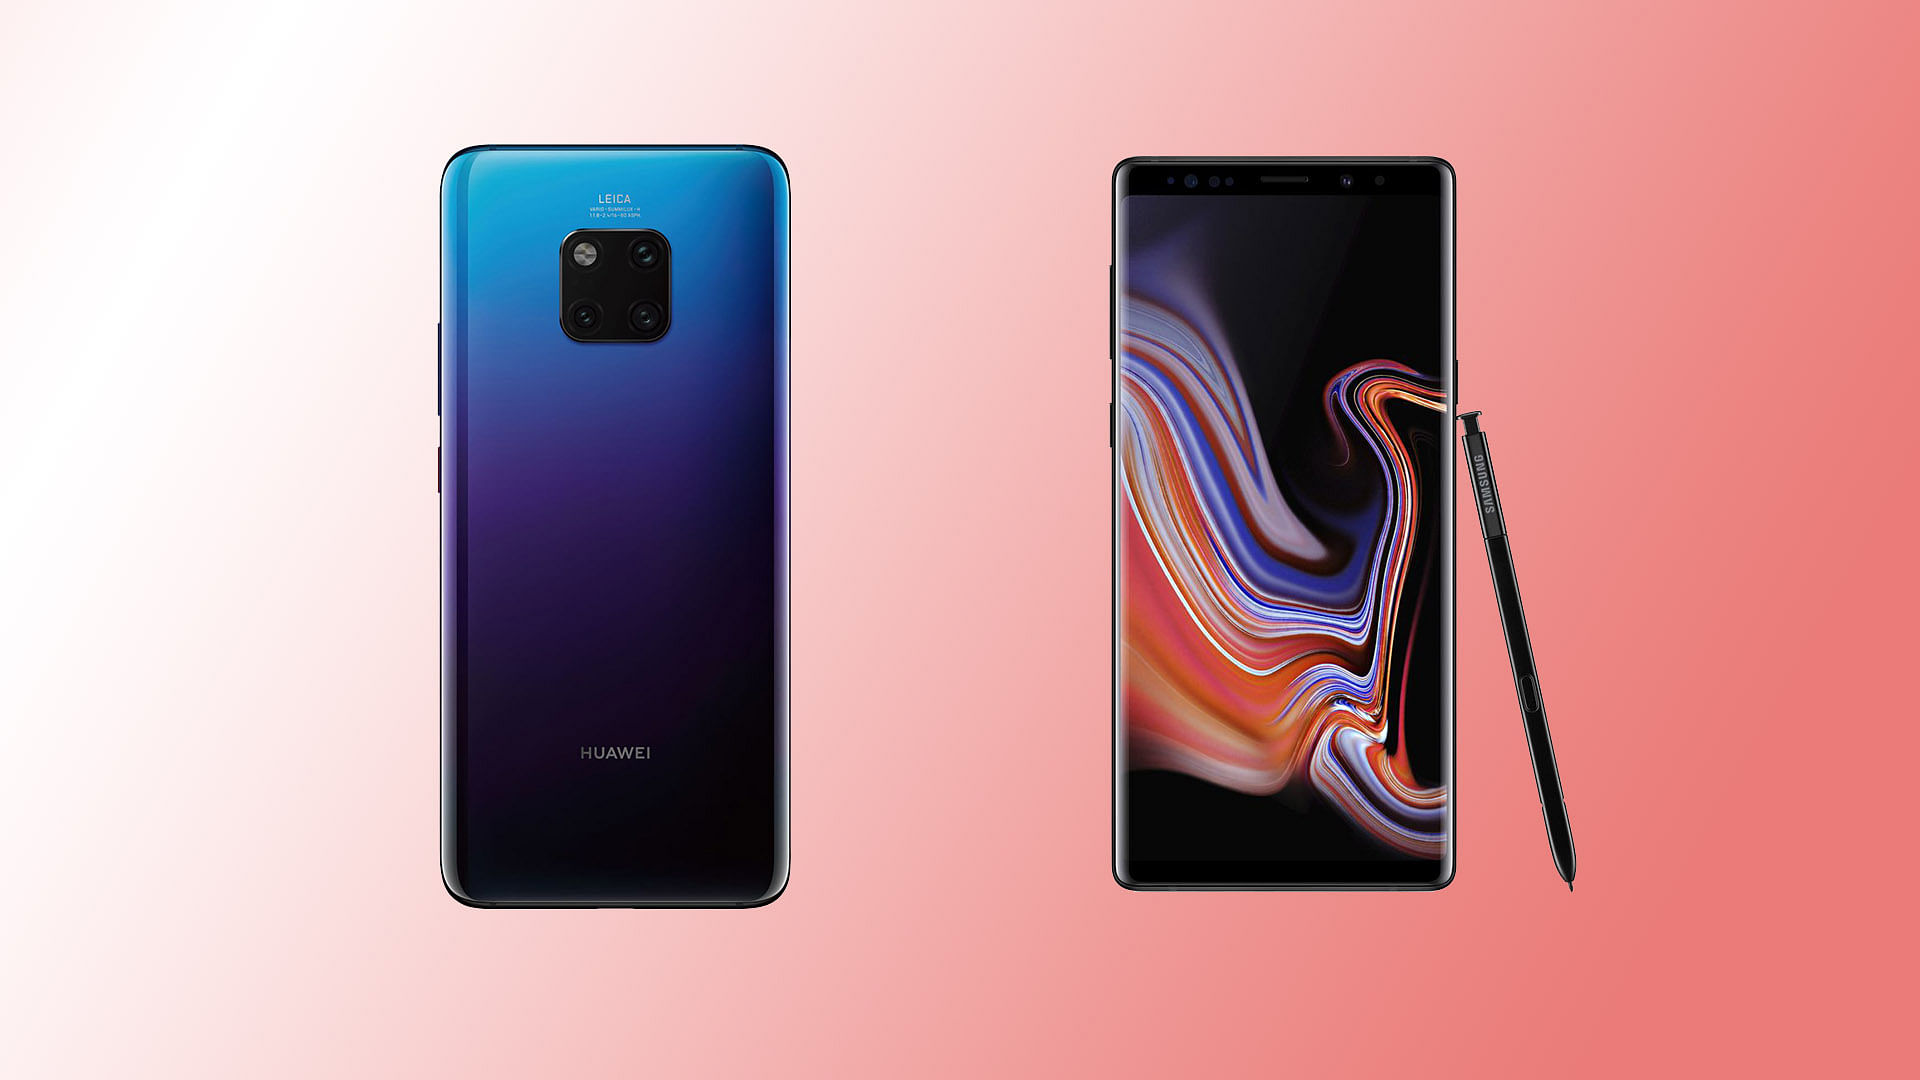 Huawei Mate 20 Pro (left) and Samsung Galaxy Note 9 (right)